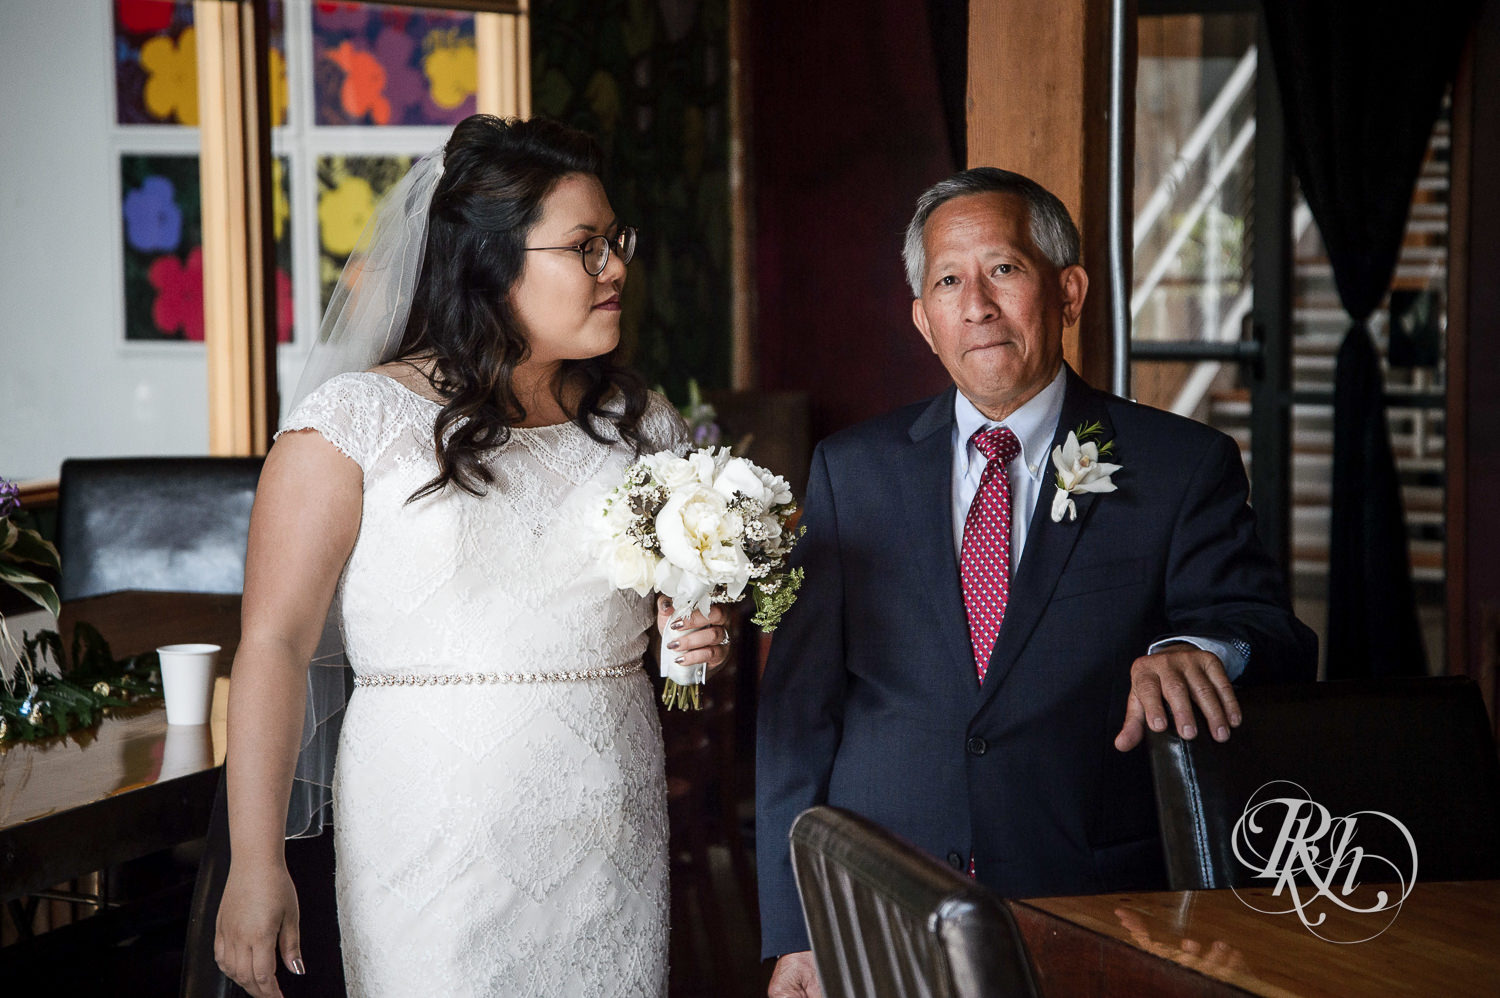 Asian bride stands with dad before wedding ceremony at 612 Brew in Minneapolis, Minnesota.